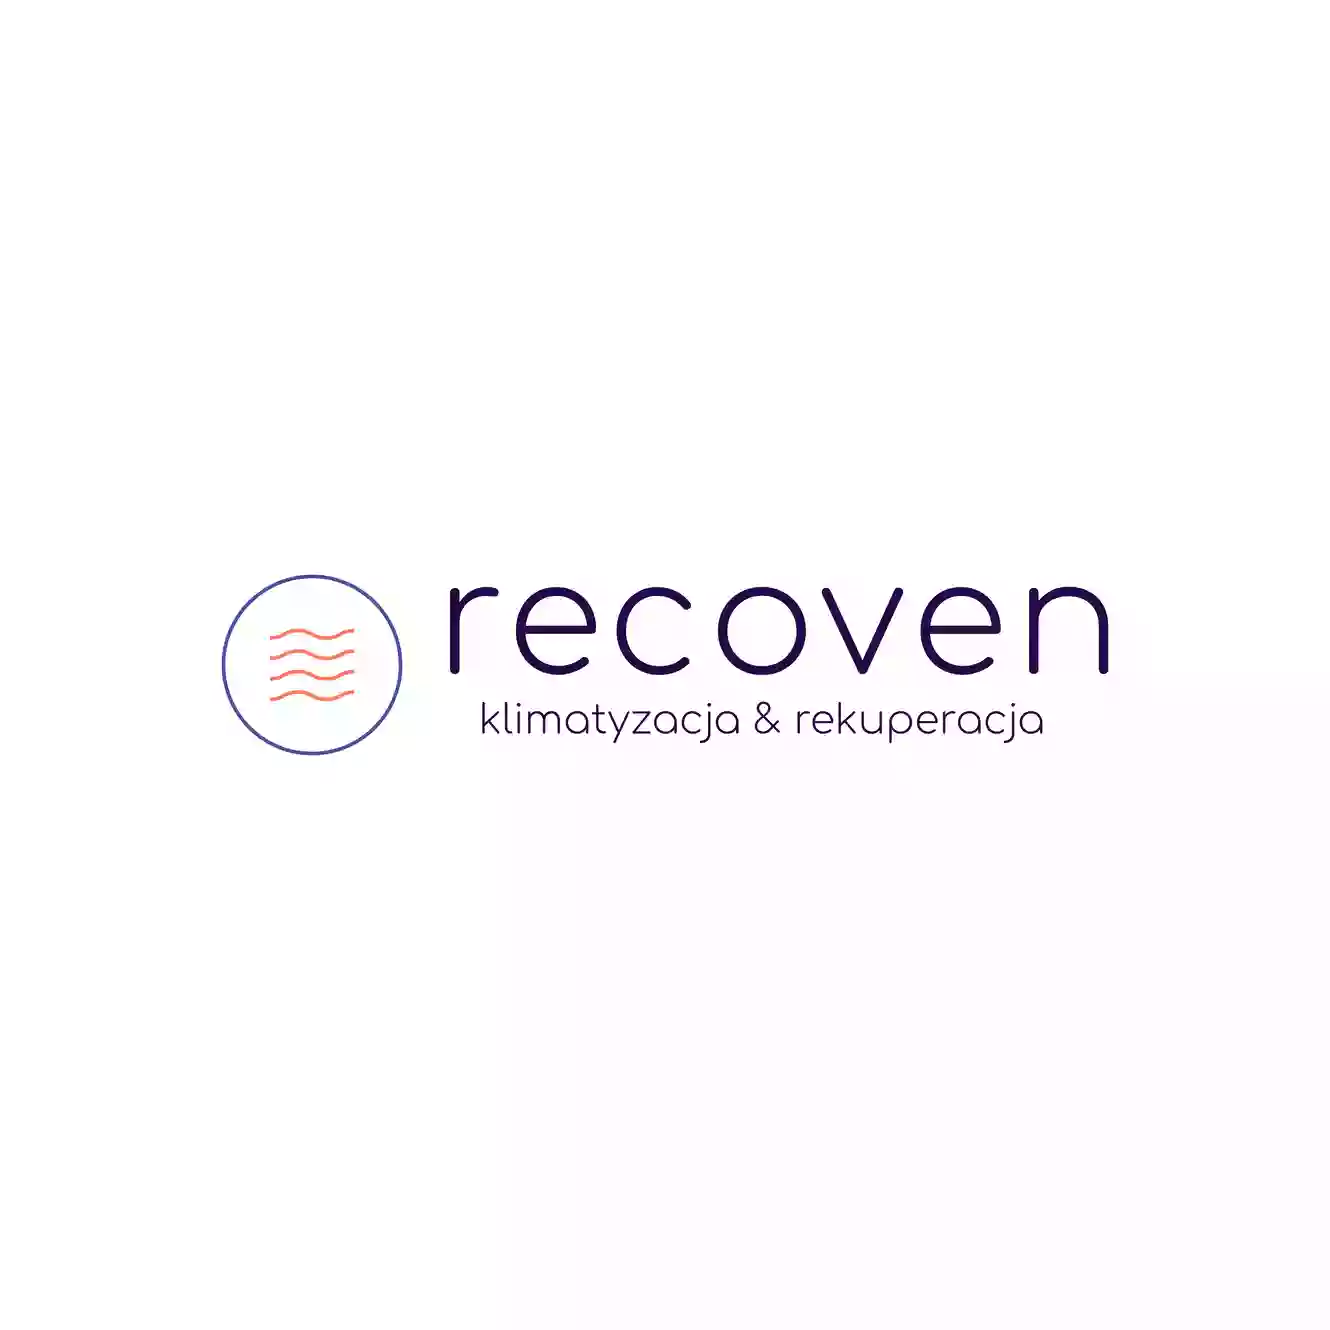 Recoven